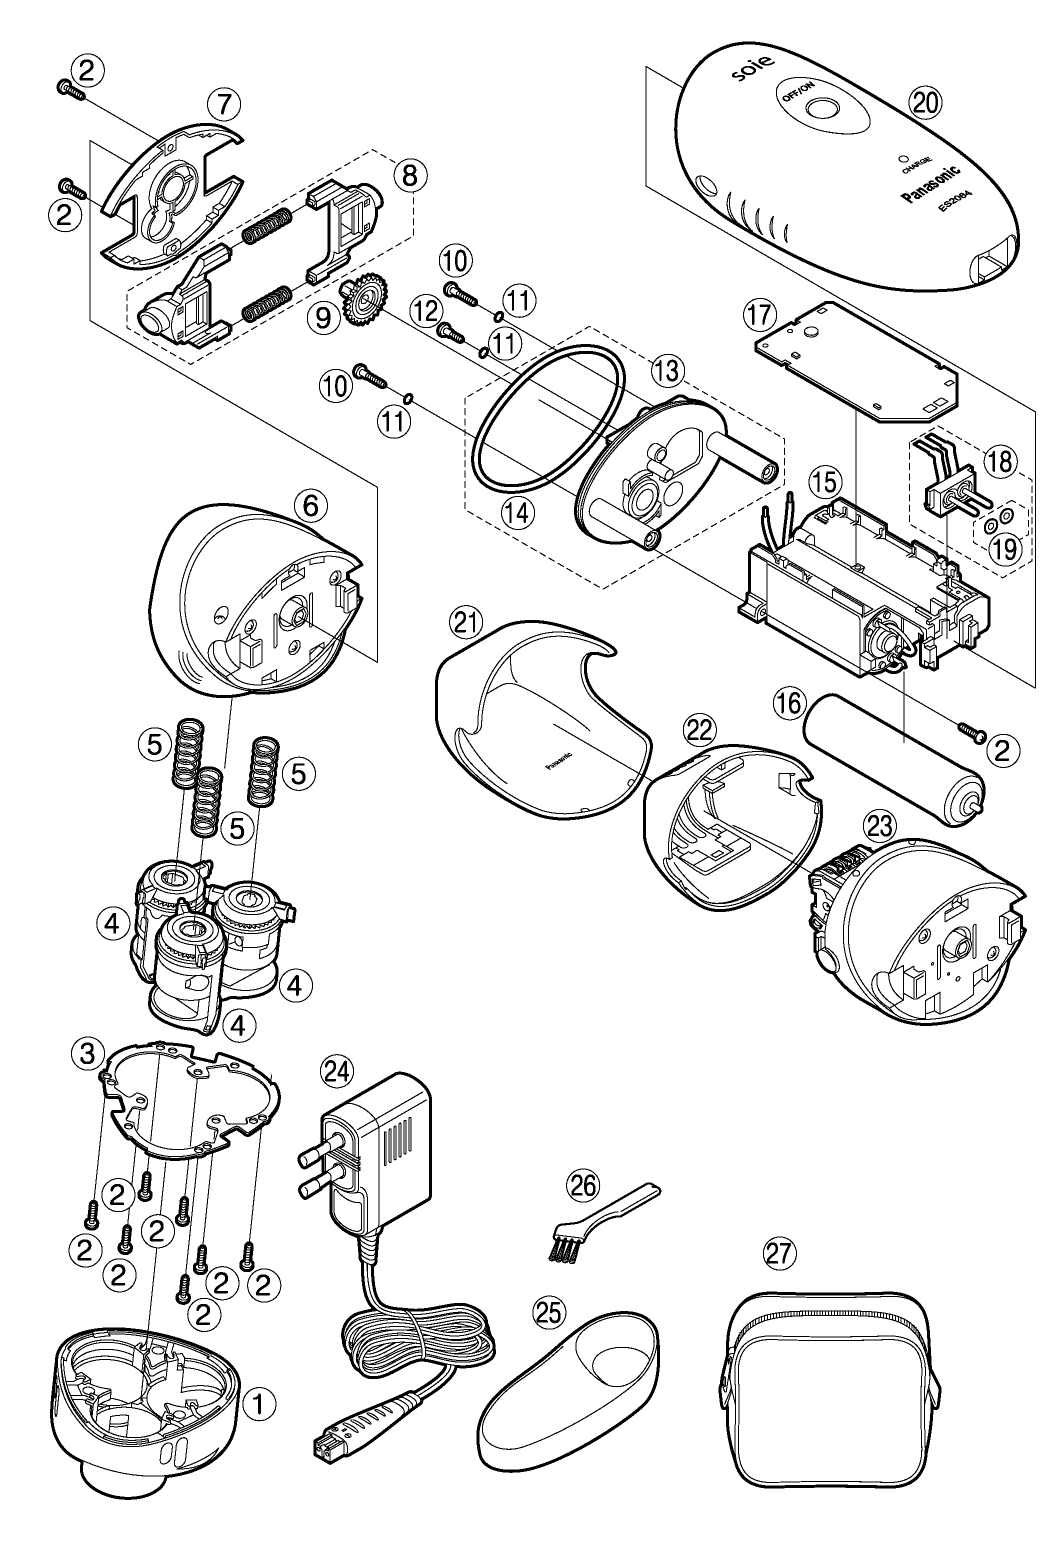 ES-2064: Exploded View